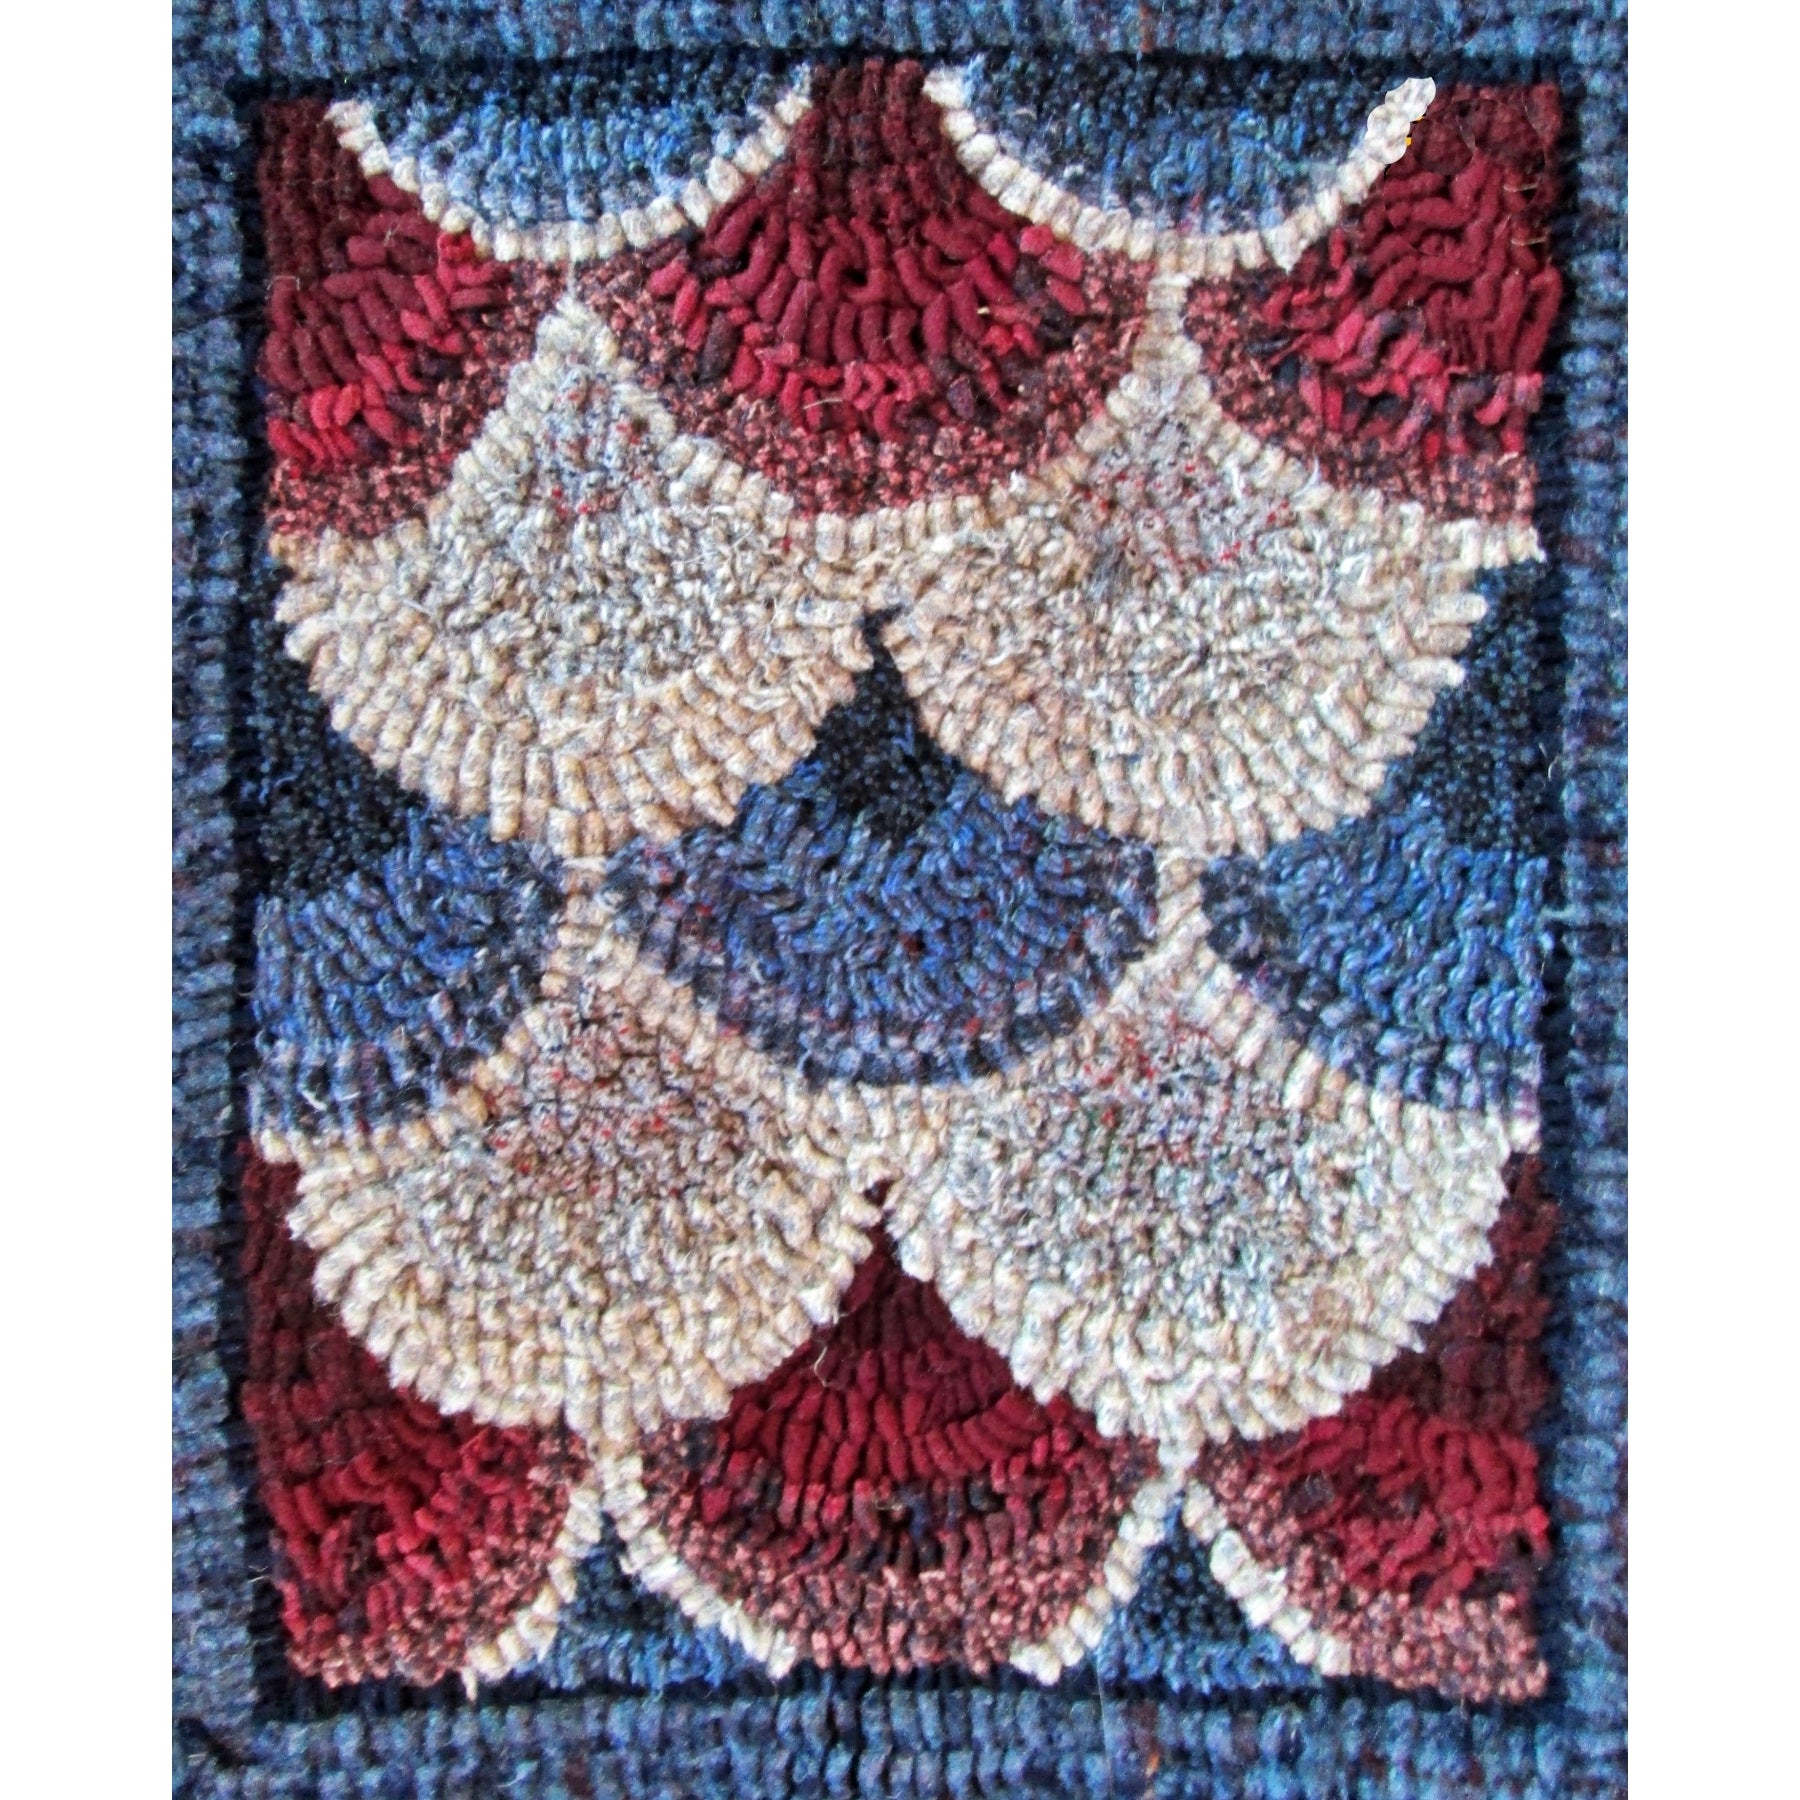 Scallop Quilt Square, rug hooked by Connie Bradley